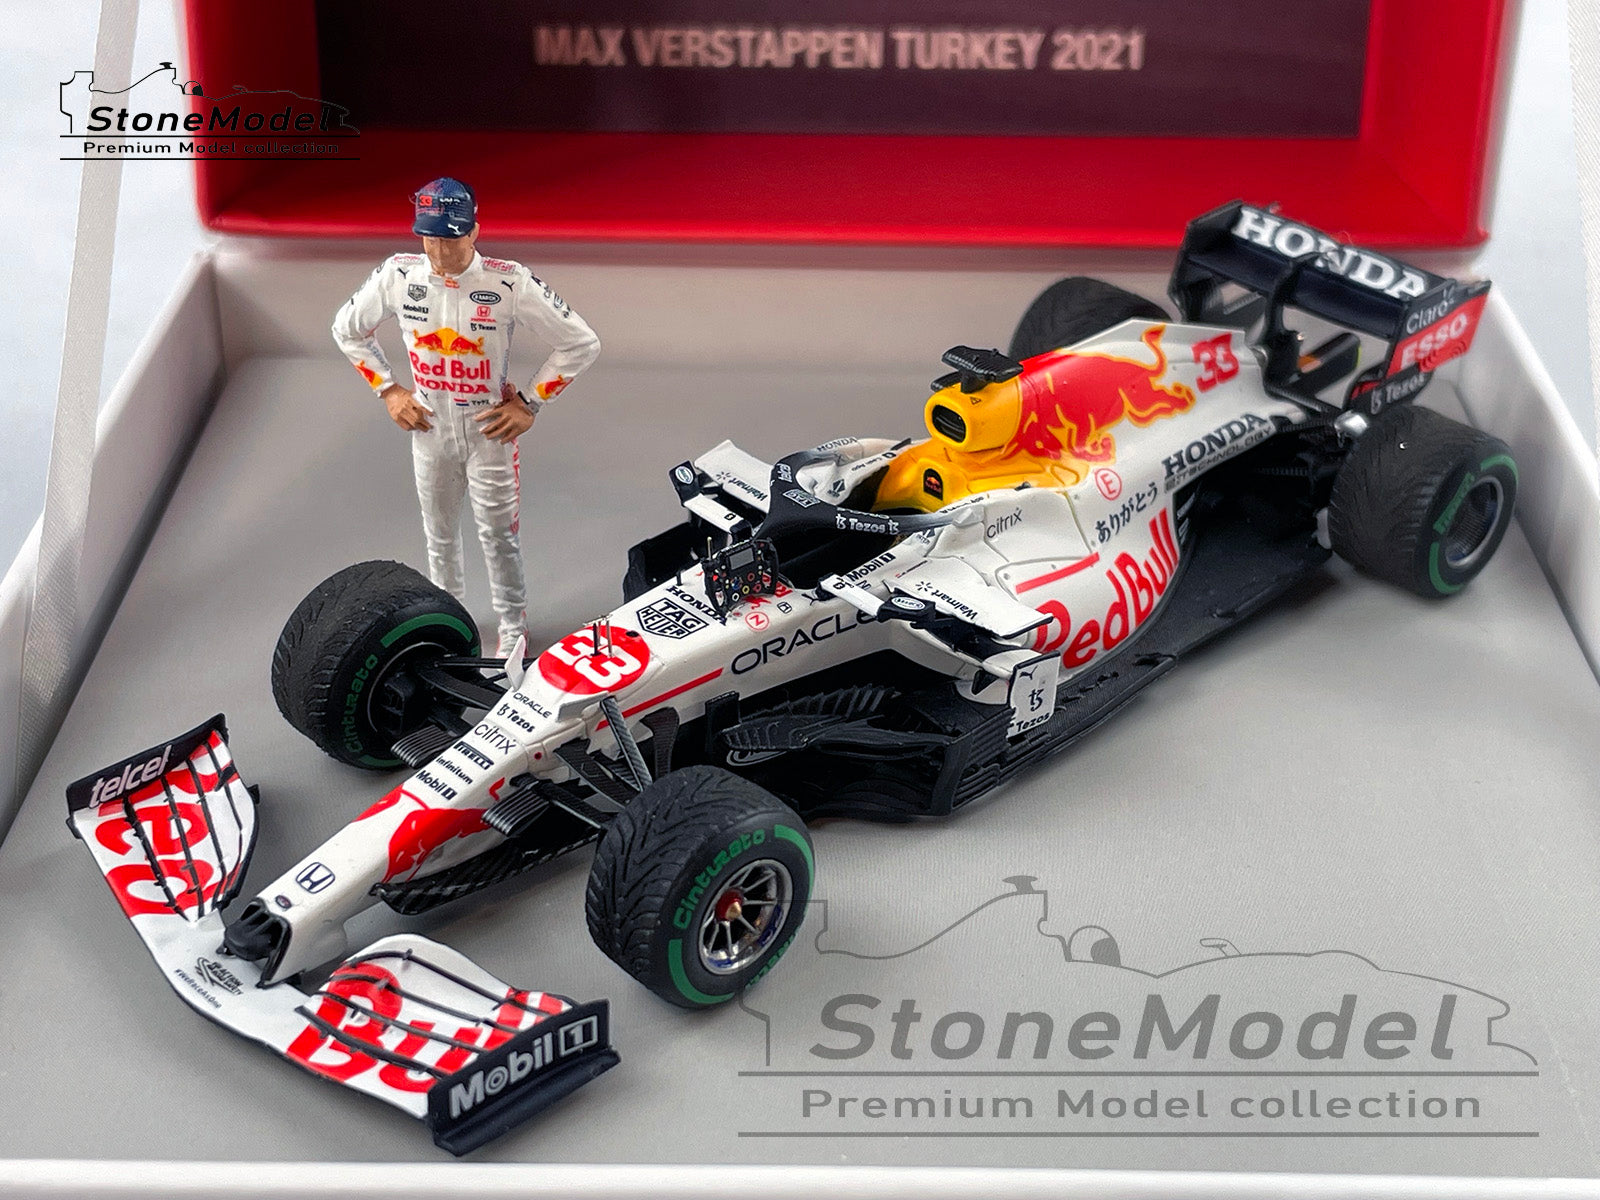 2021 F1 World Champion #33 Max Verstappen Red Bull RB16B Turkish GP Special  Livery 1:43 Spark Figure Gift Box